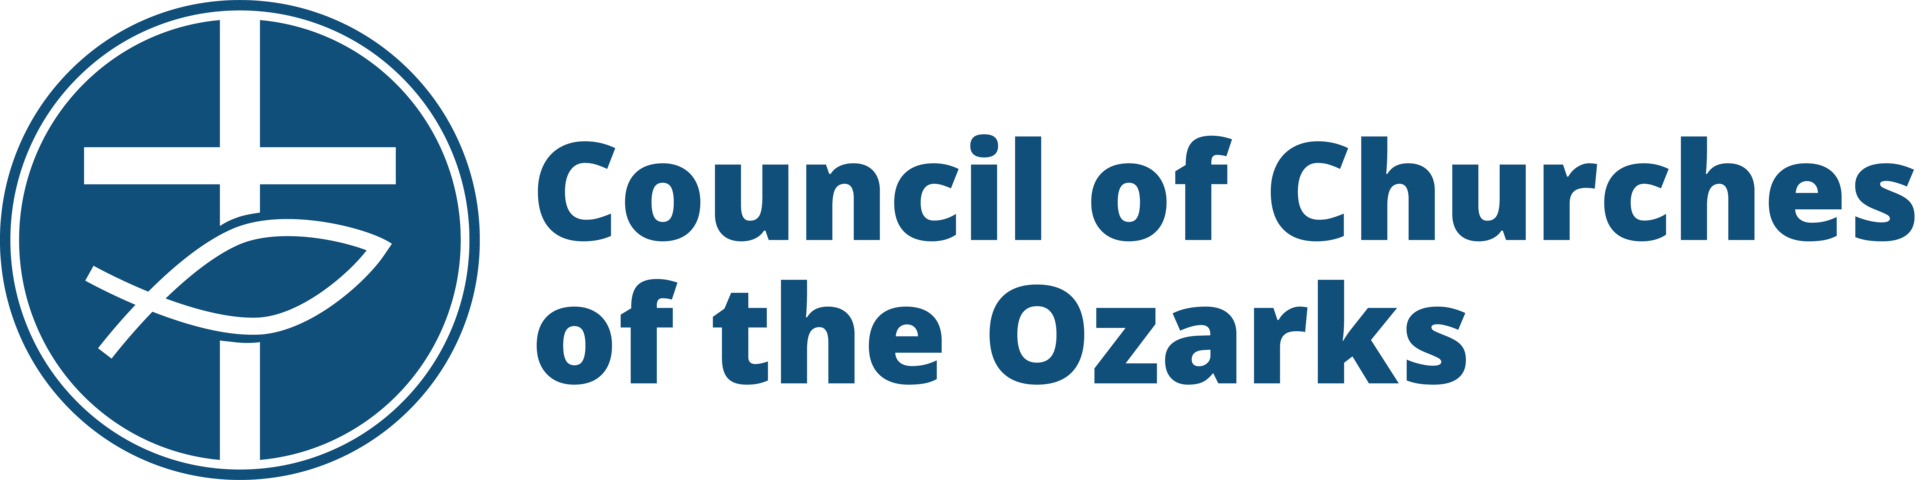 Council of Churches of the Ozarks